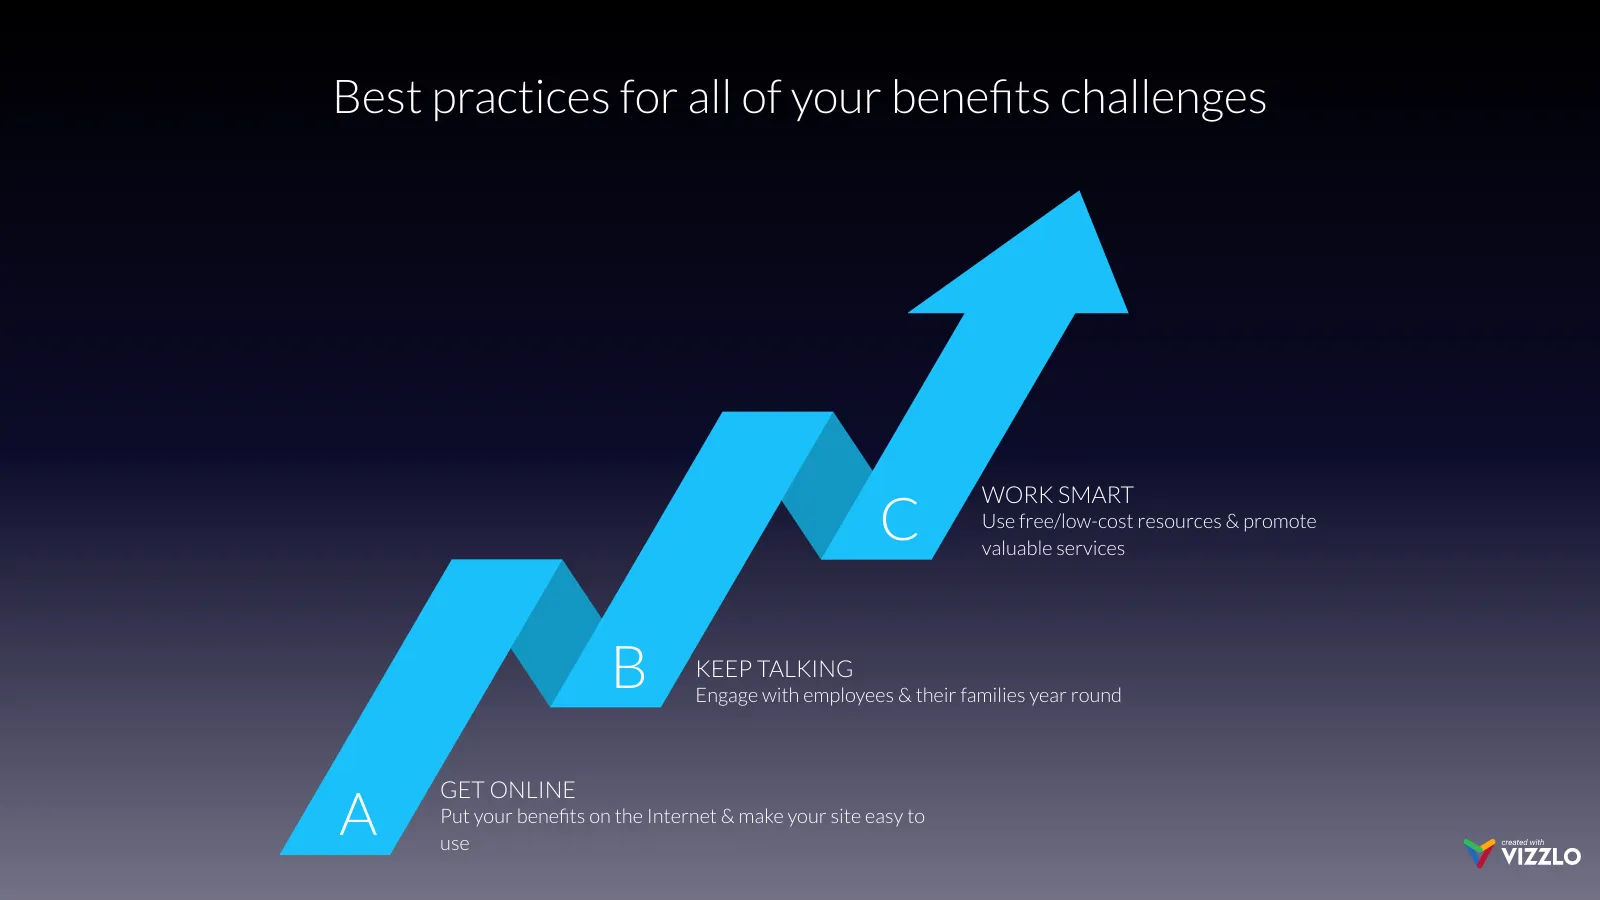 Milestones as Arrow example: Best practices for all of your benefits challenges